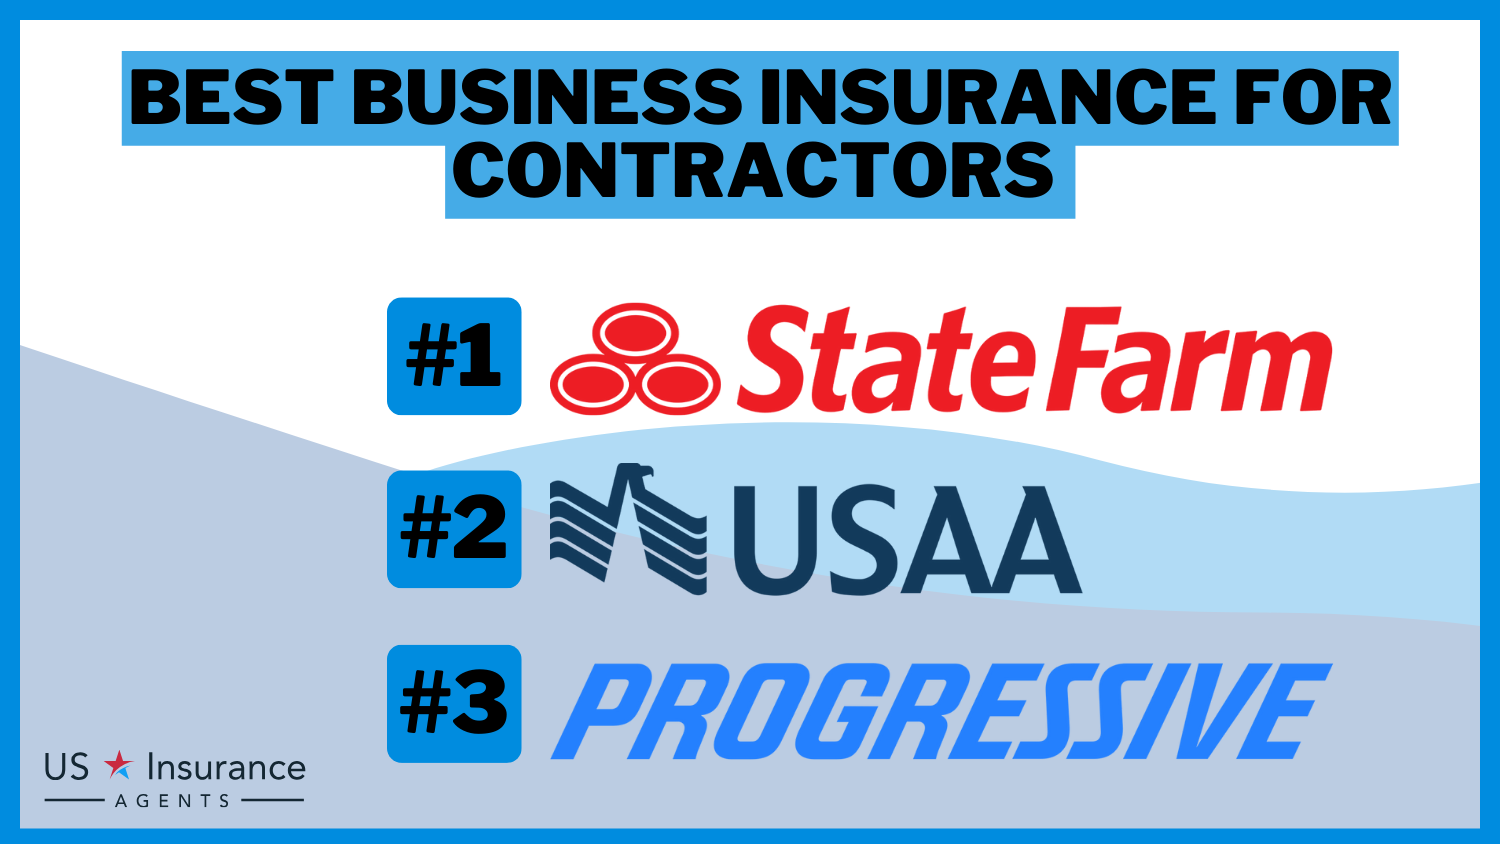 Best Business Insurance for Contractors: StateFarm, USAA and Progressive